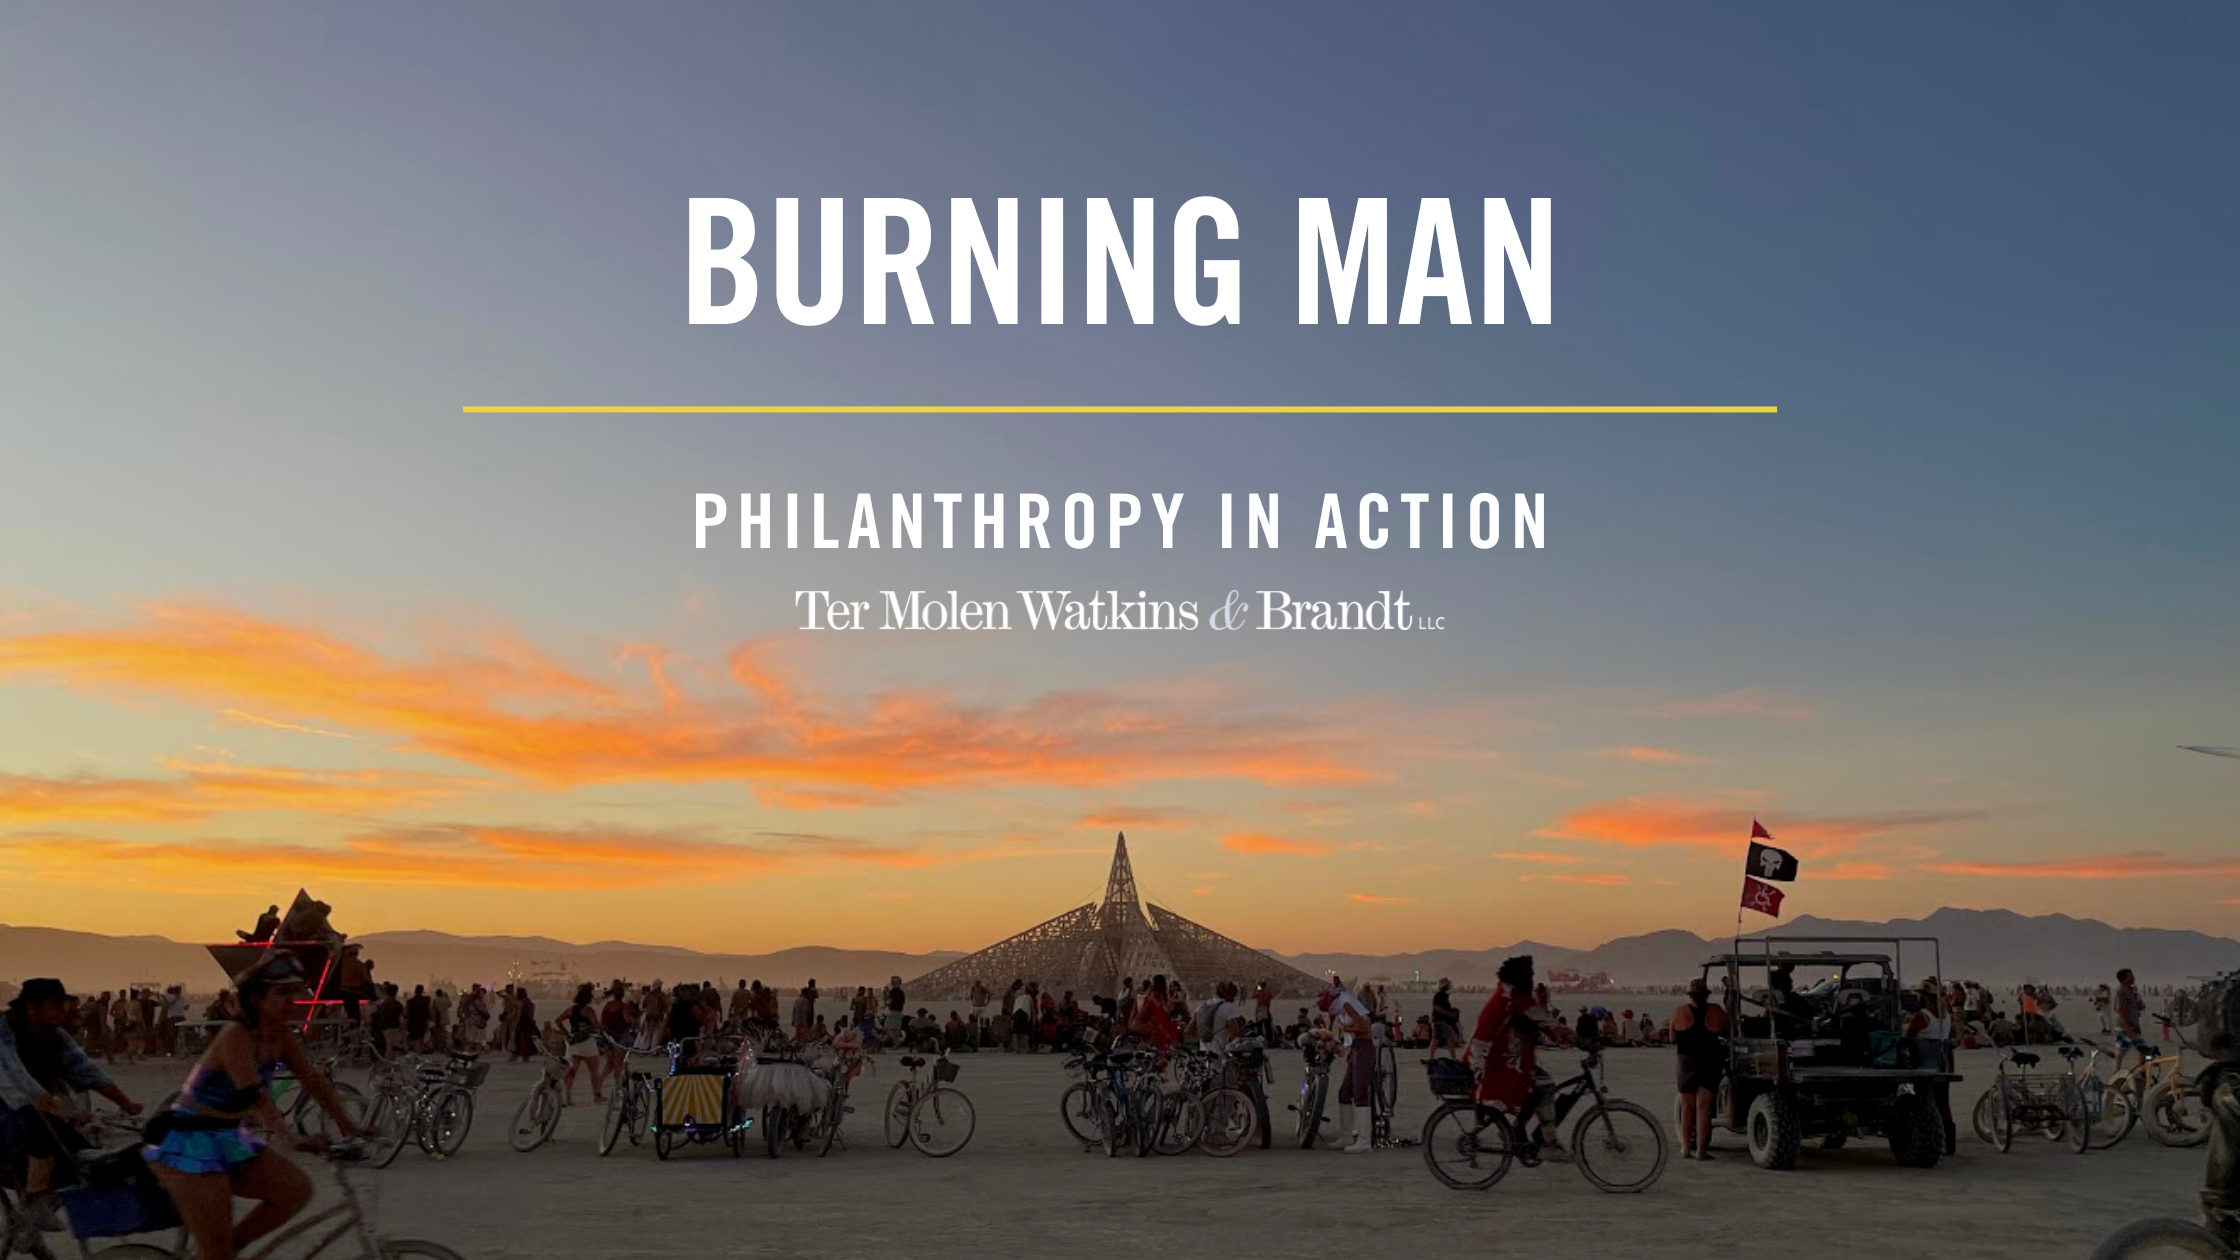 A photo banner of an image from Burning Man at sunset. In the background is a temple-like statue, with people walking and bike riding in front of it.